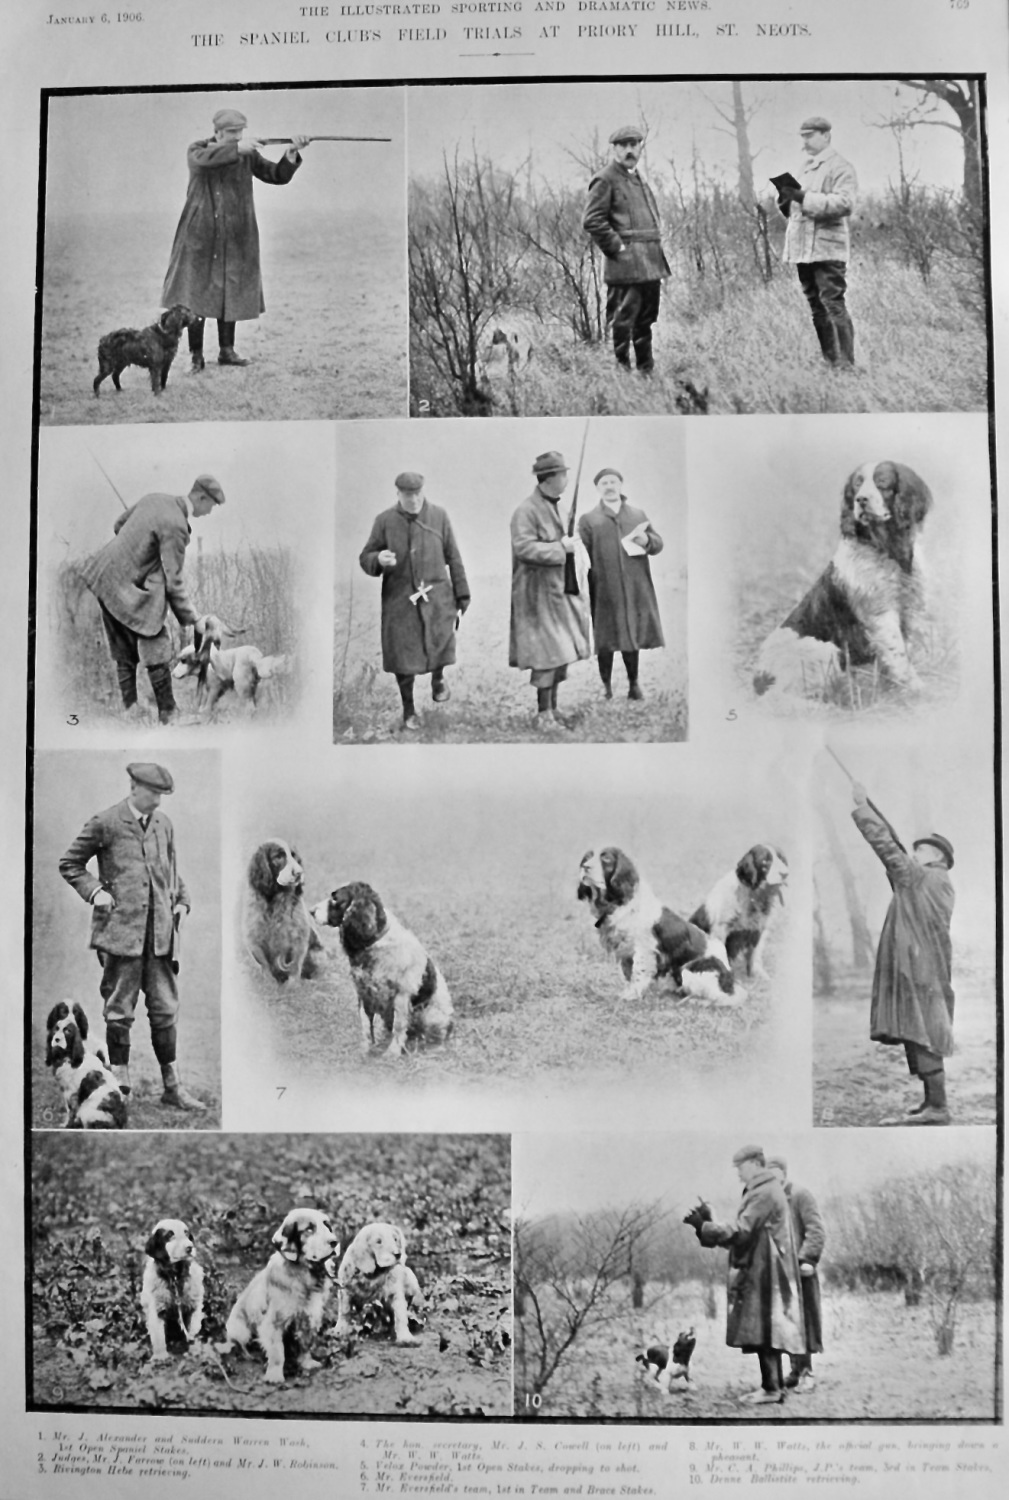 The Spaniel Club's Field Trials at Priory Hill, St. Neots. 1906.